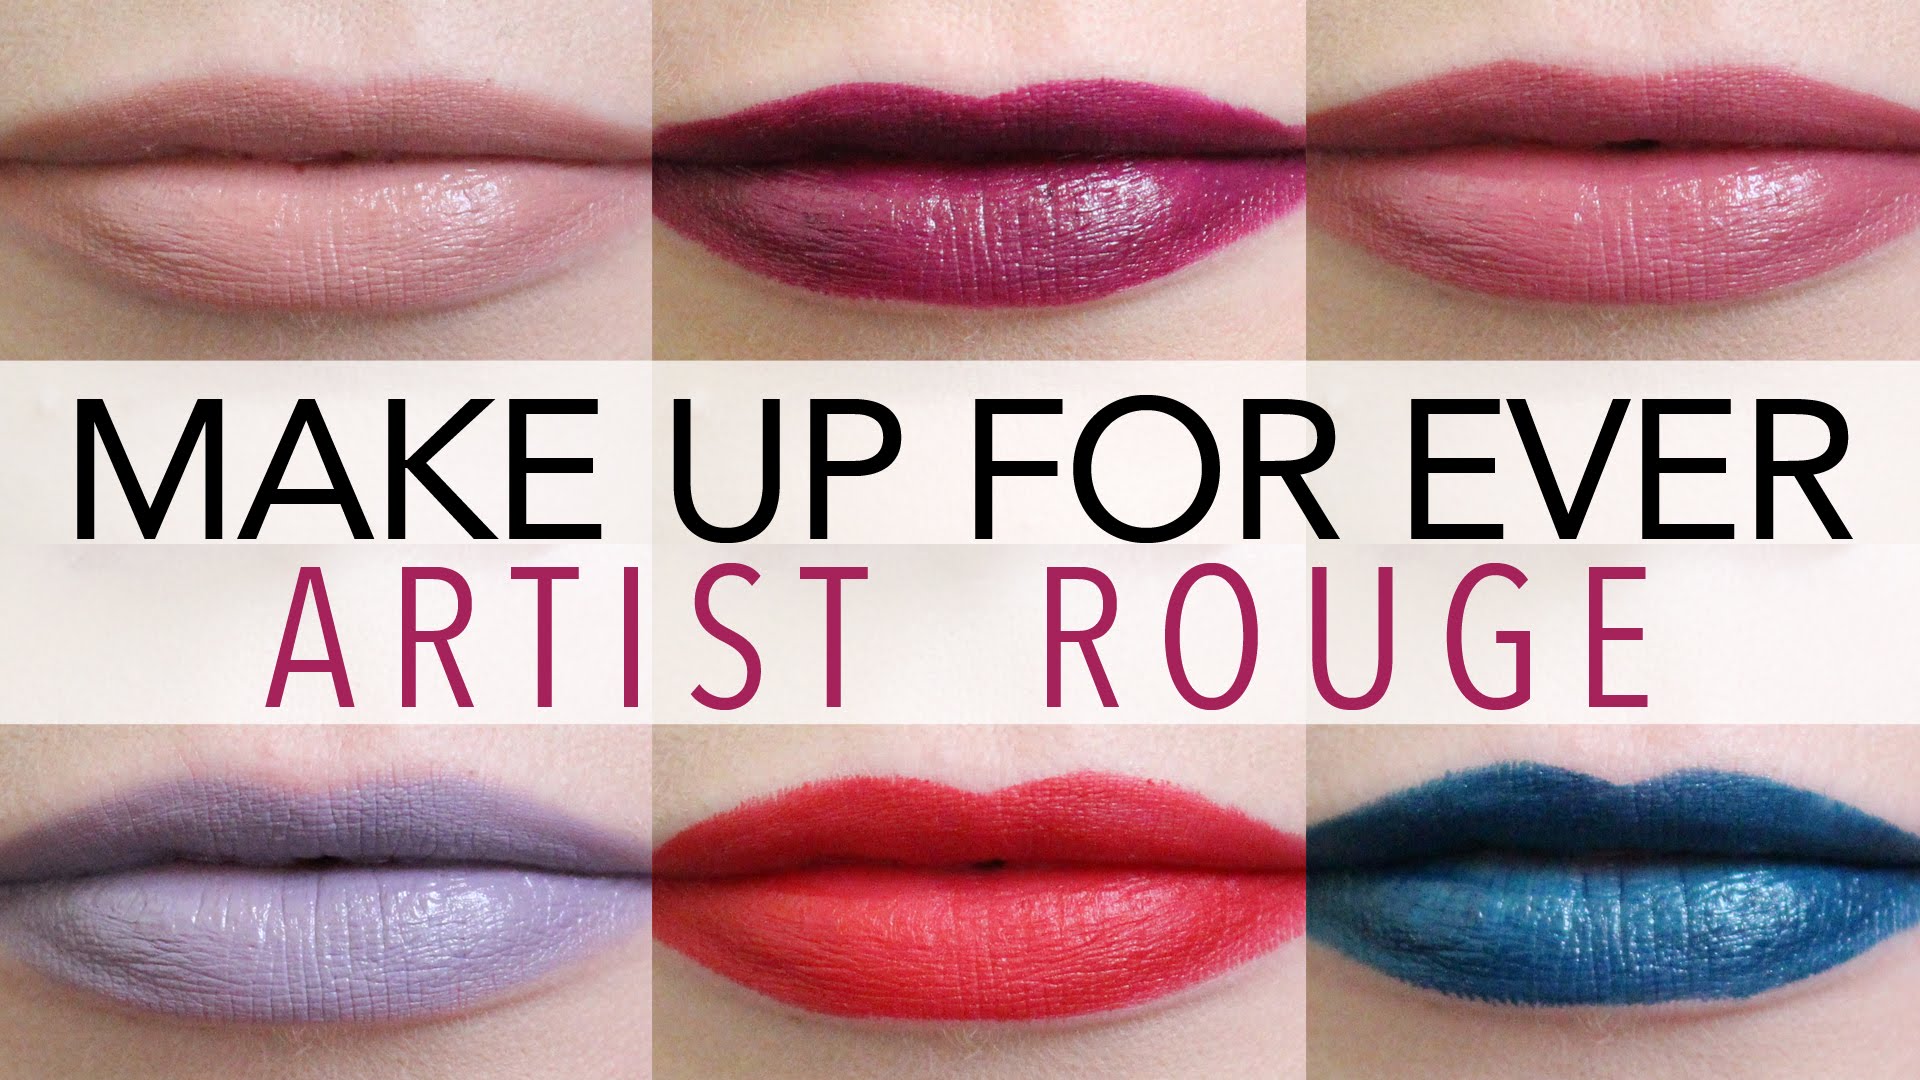 NEW! Make Up For Ever Artist Rouge Lipstick Swatches - YouTube